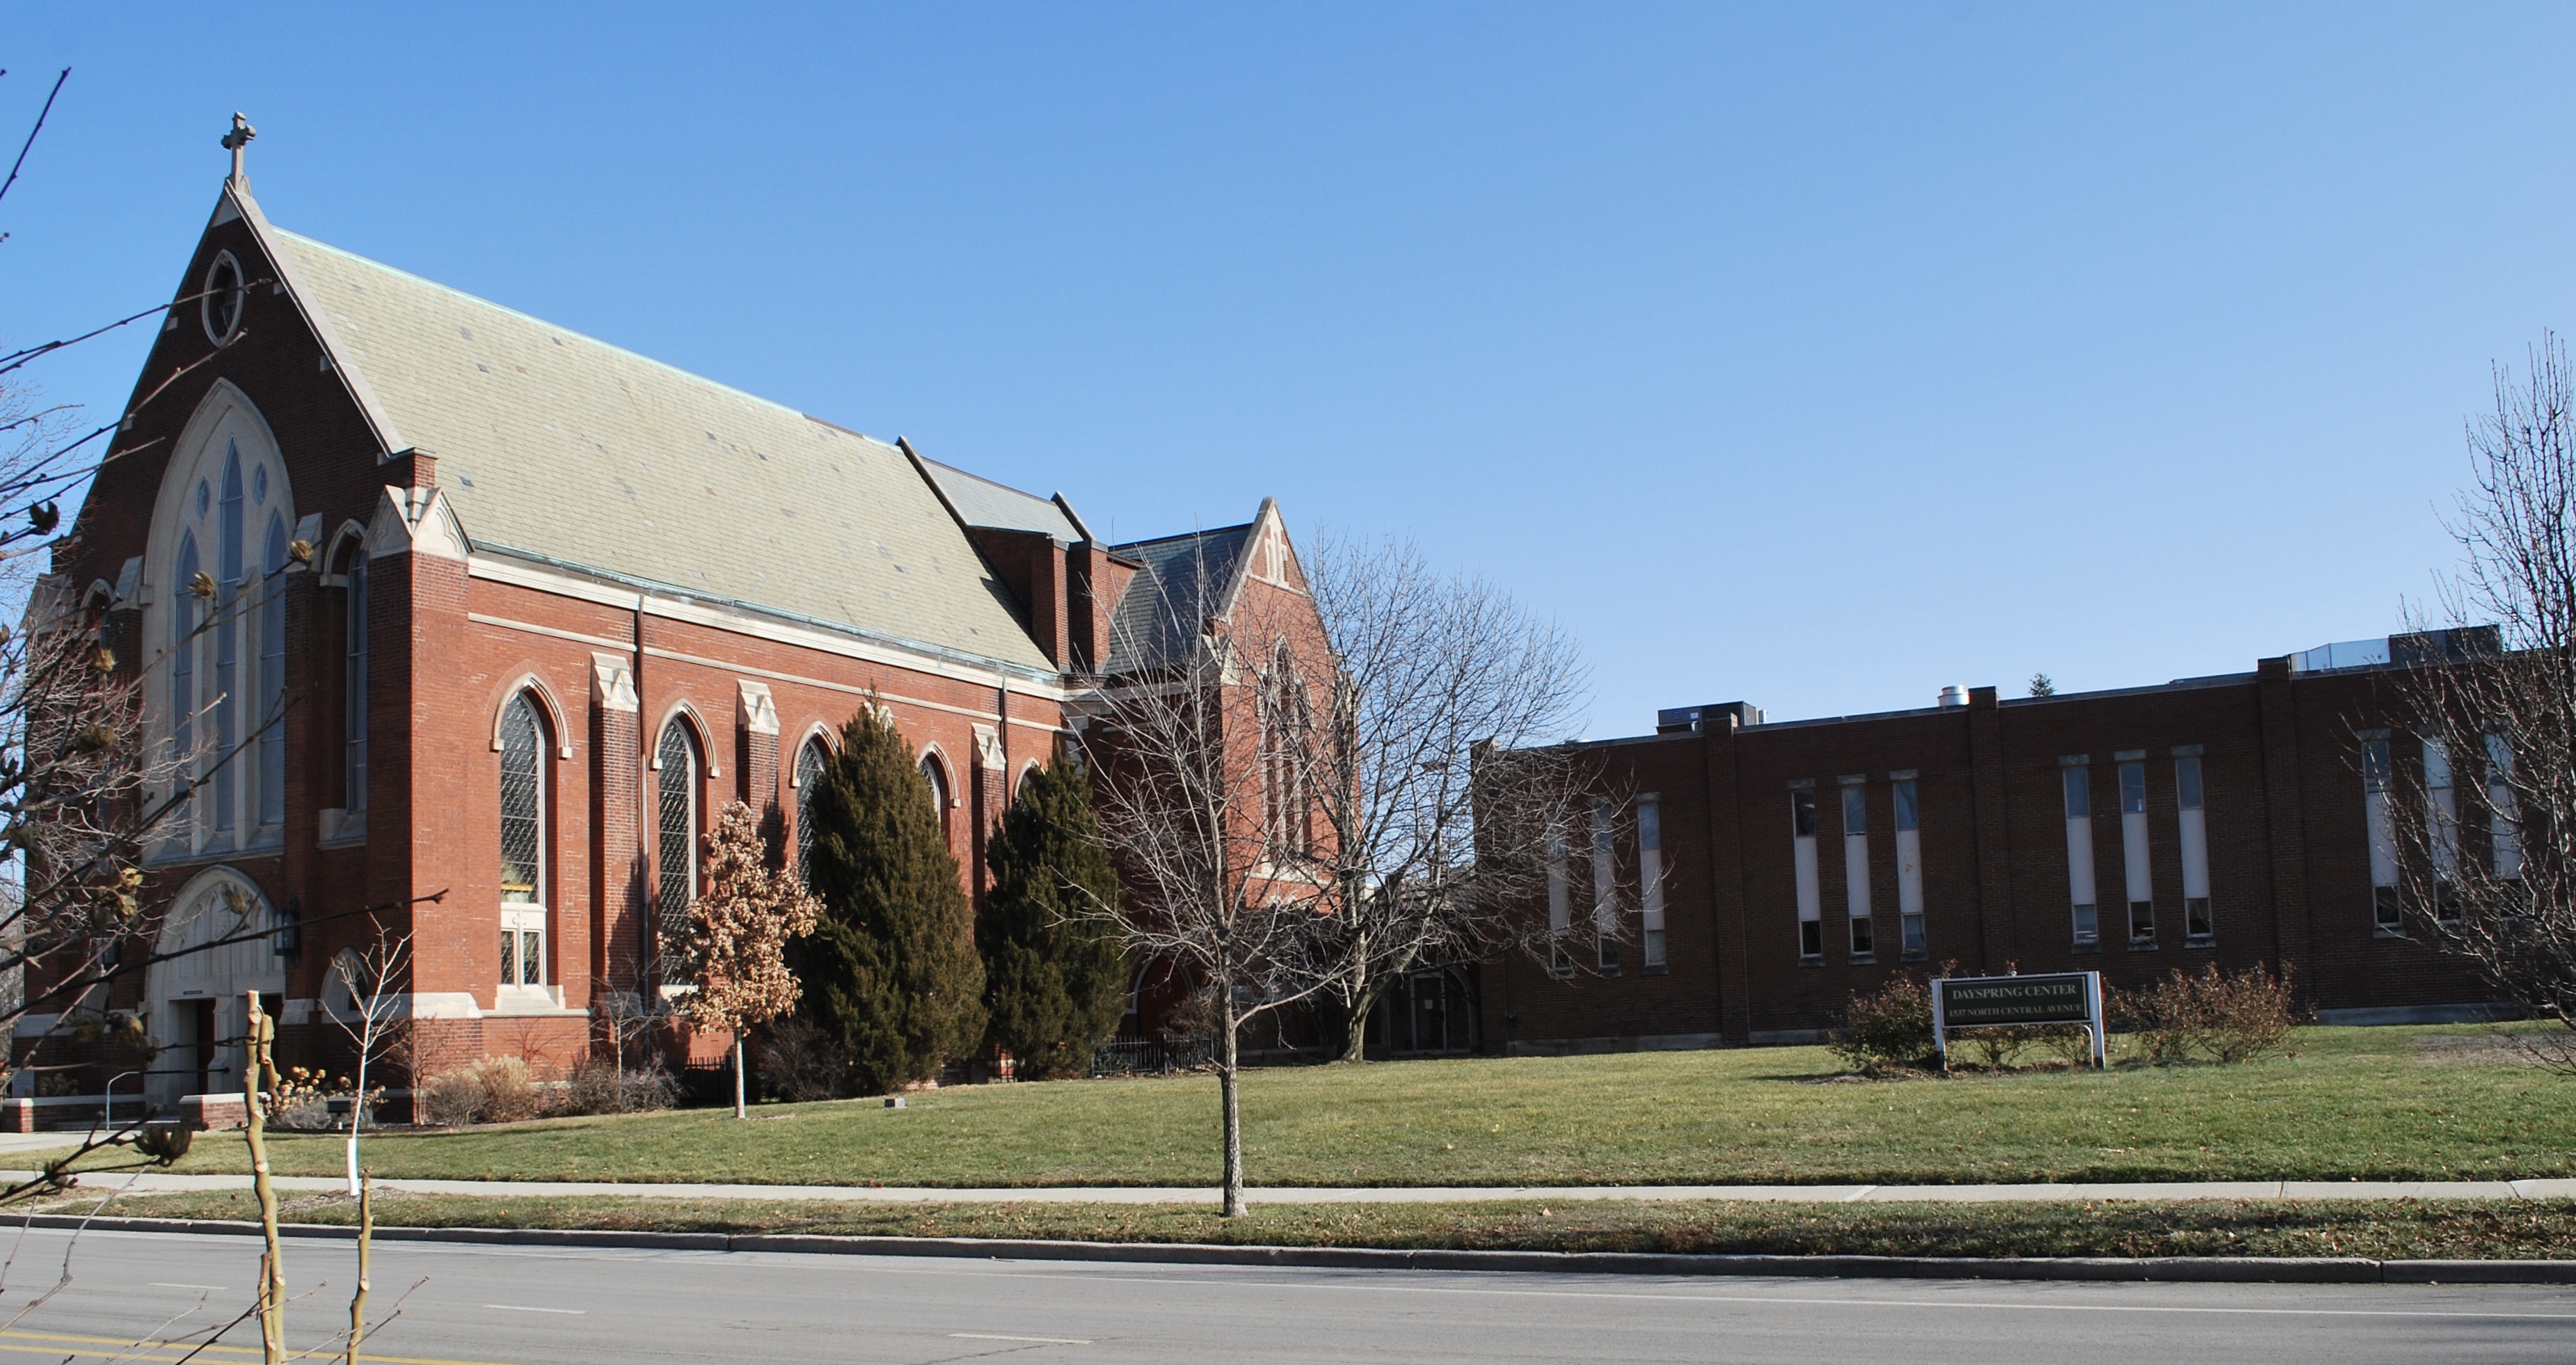 A rectangular brick building with several windows in sets of threes is attached to a large brick church with gabled roof. 